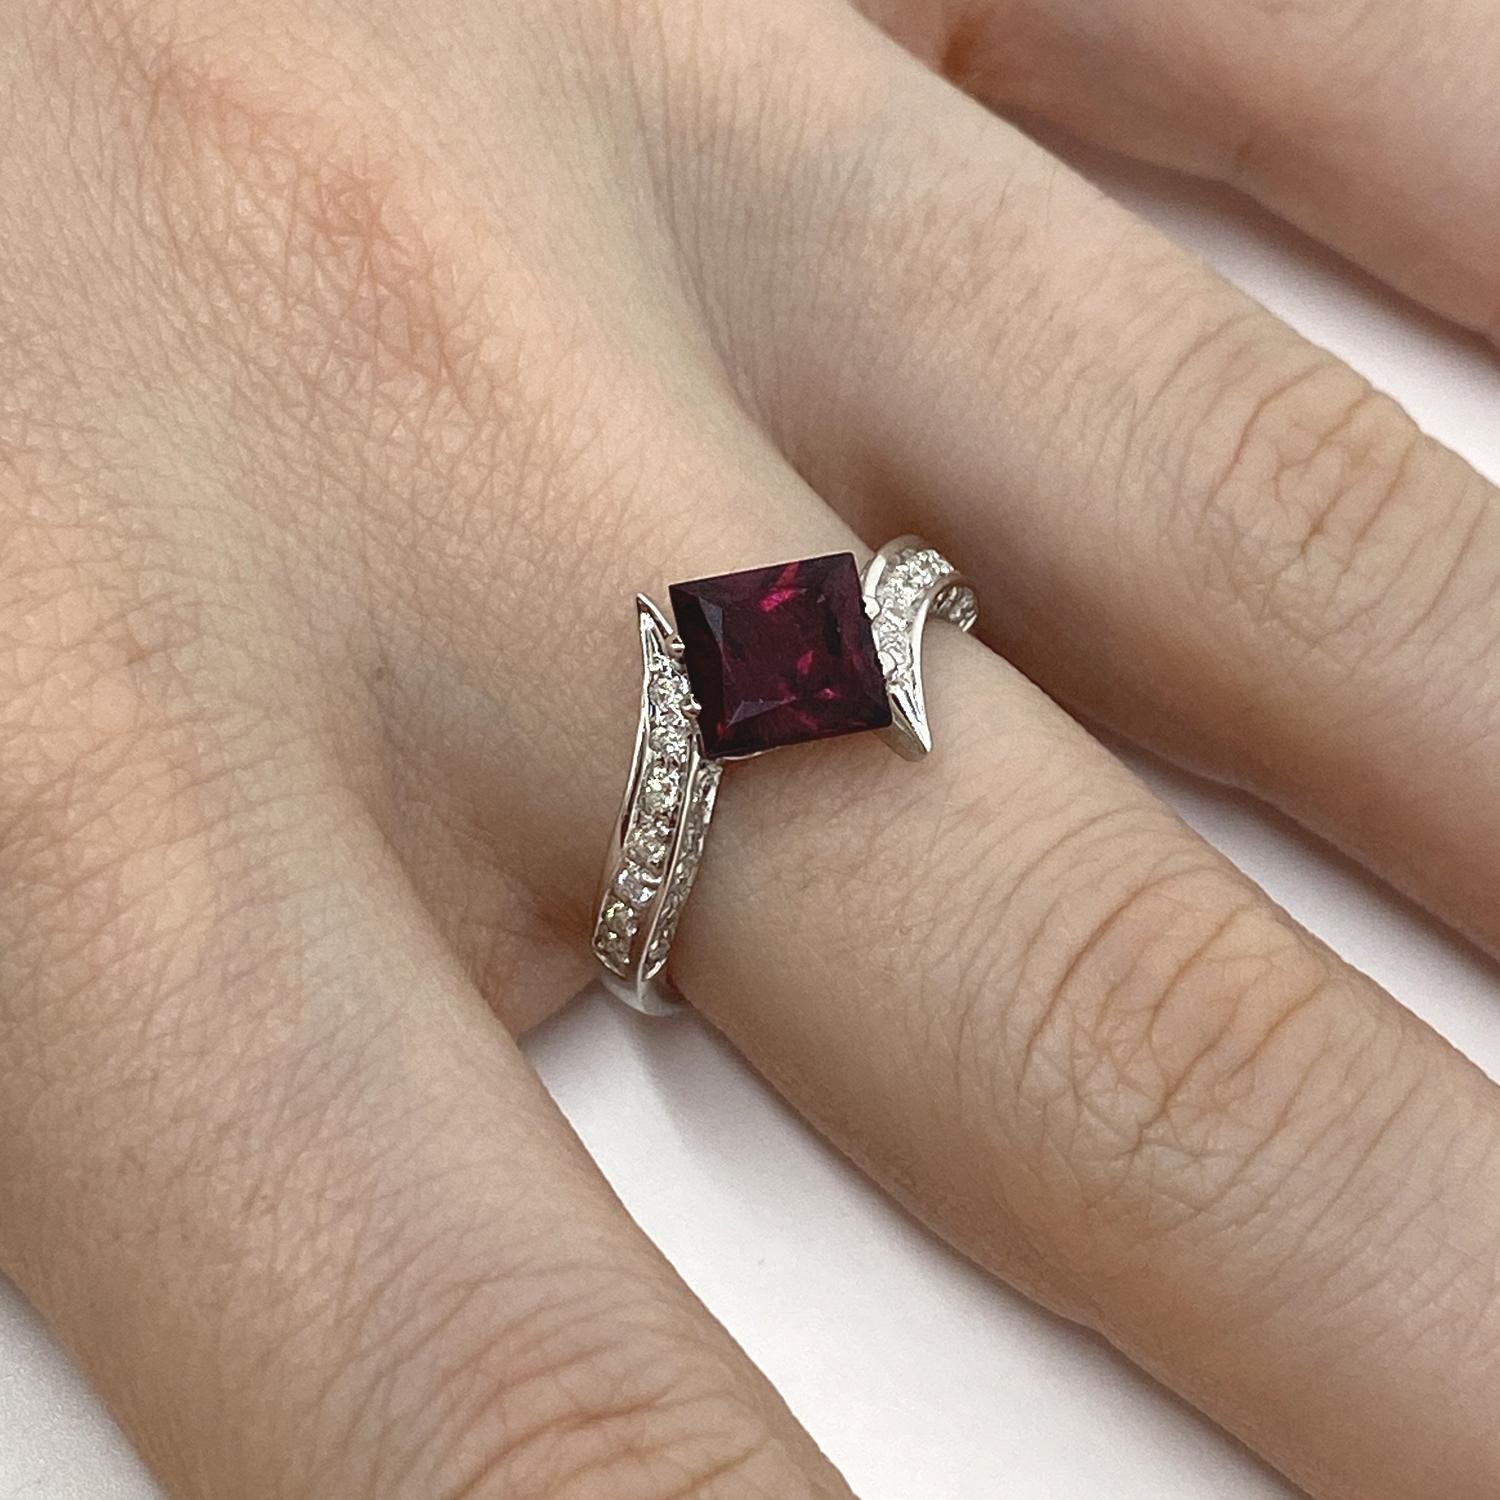 Ring made of 18kt white gold with carré - cut garnet for ct.1.80 and white brilliant - cut diamonds for ct.0.40
-------------------------------------------------

Important Note : In order to speed up the publishing process of our vast inventory,